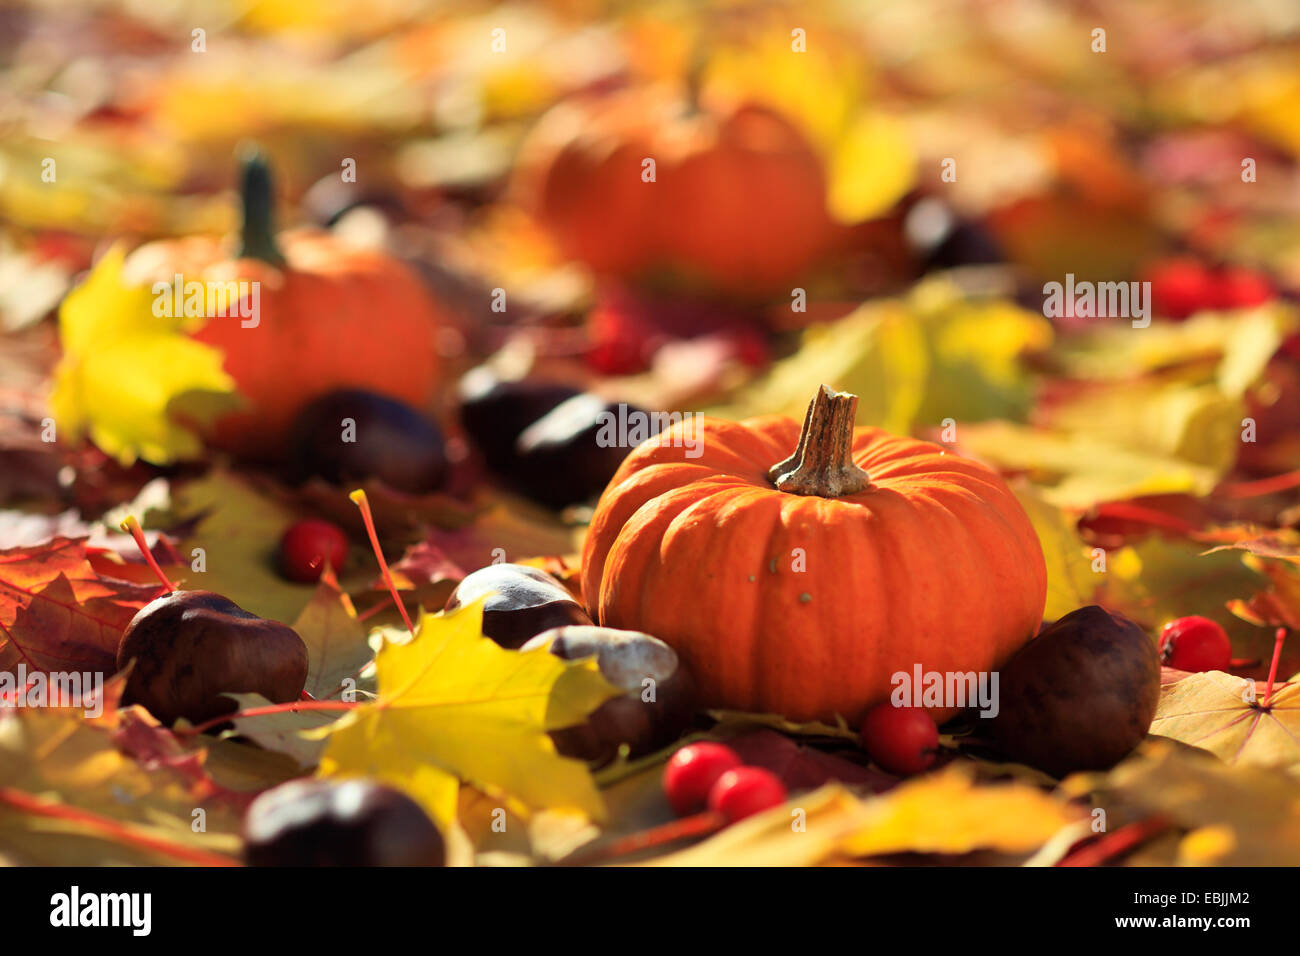 pumpkins and horse chestnuts on leaves, Switzerland Stock Photo